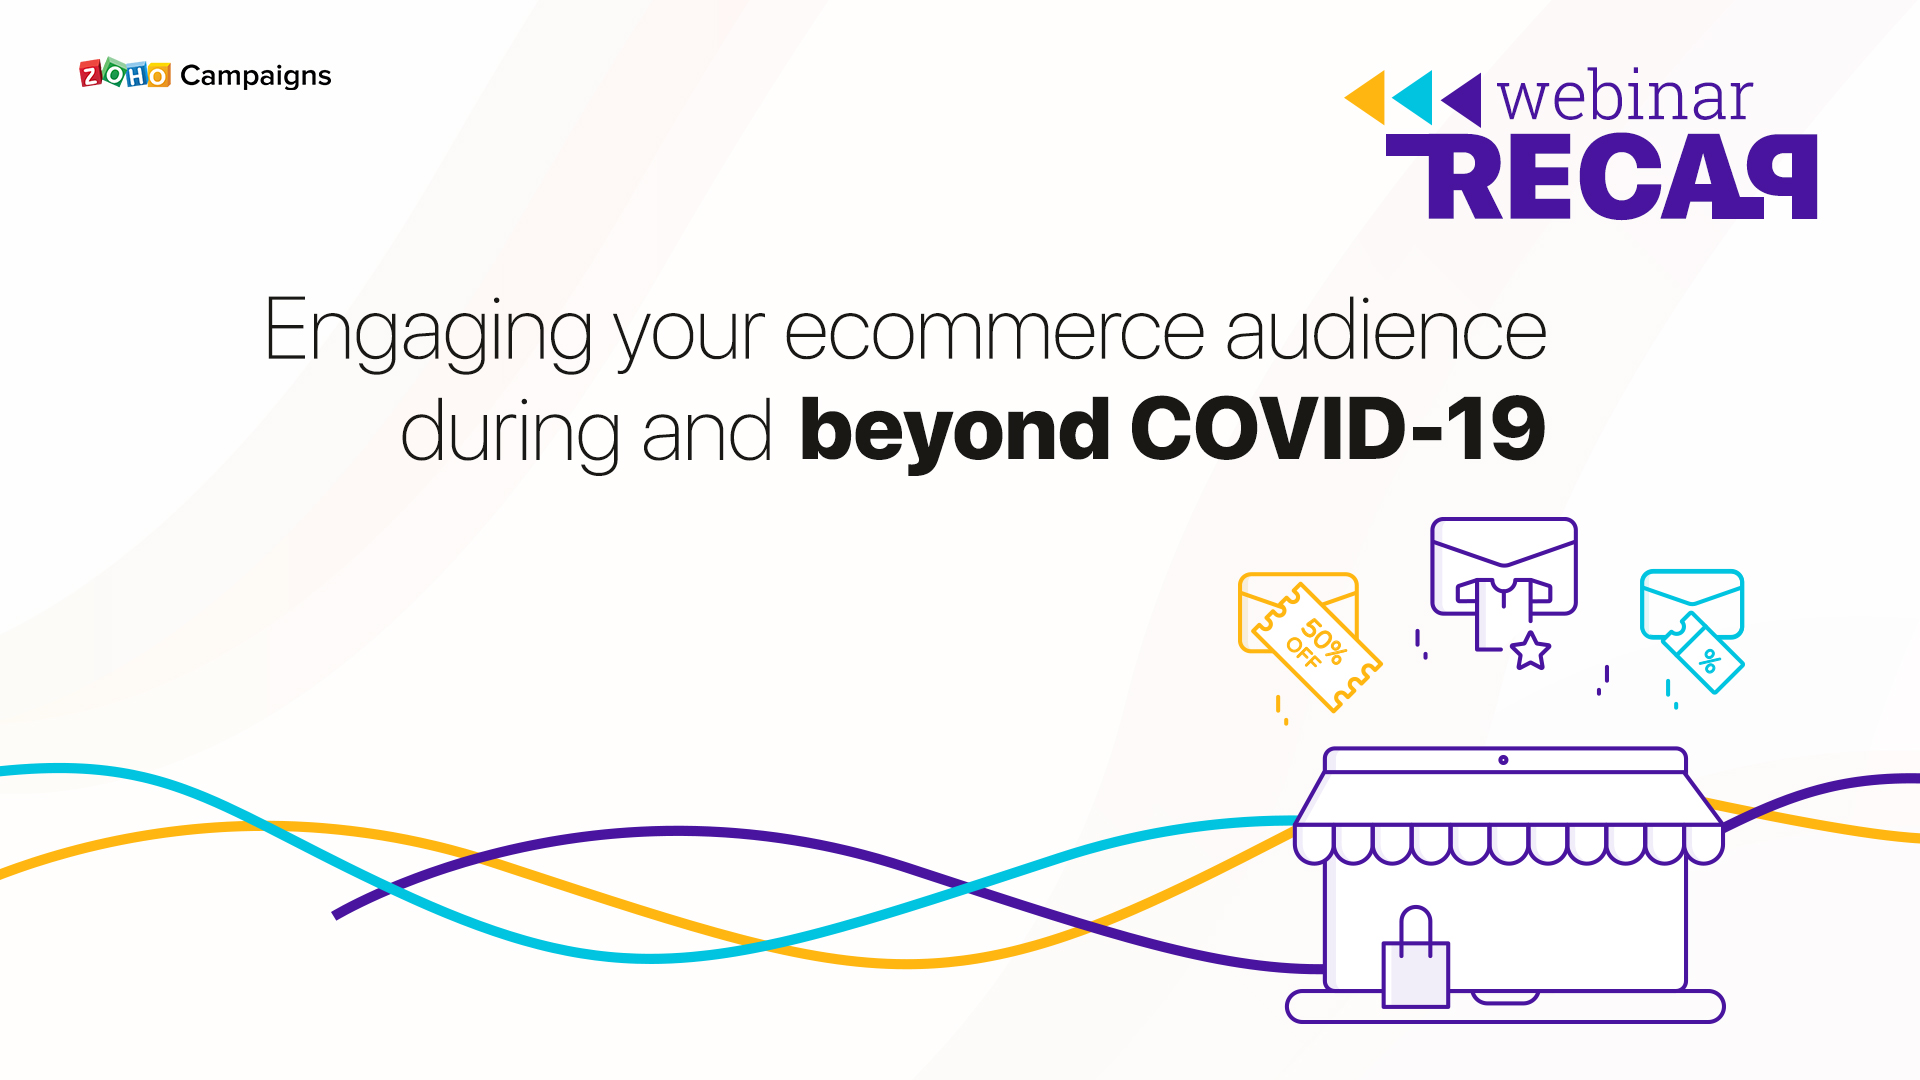 Webinar Recap: Engaging your ecommerce audience during and beyond COVID-19